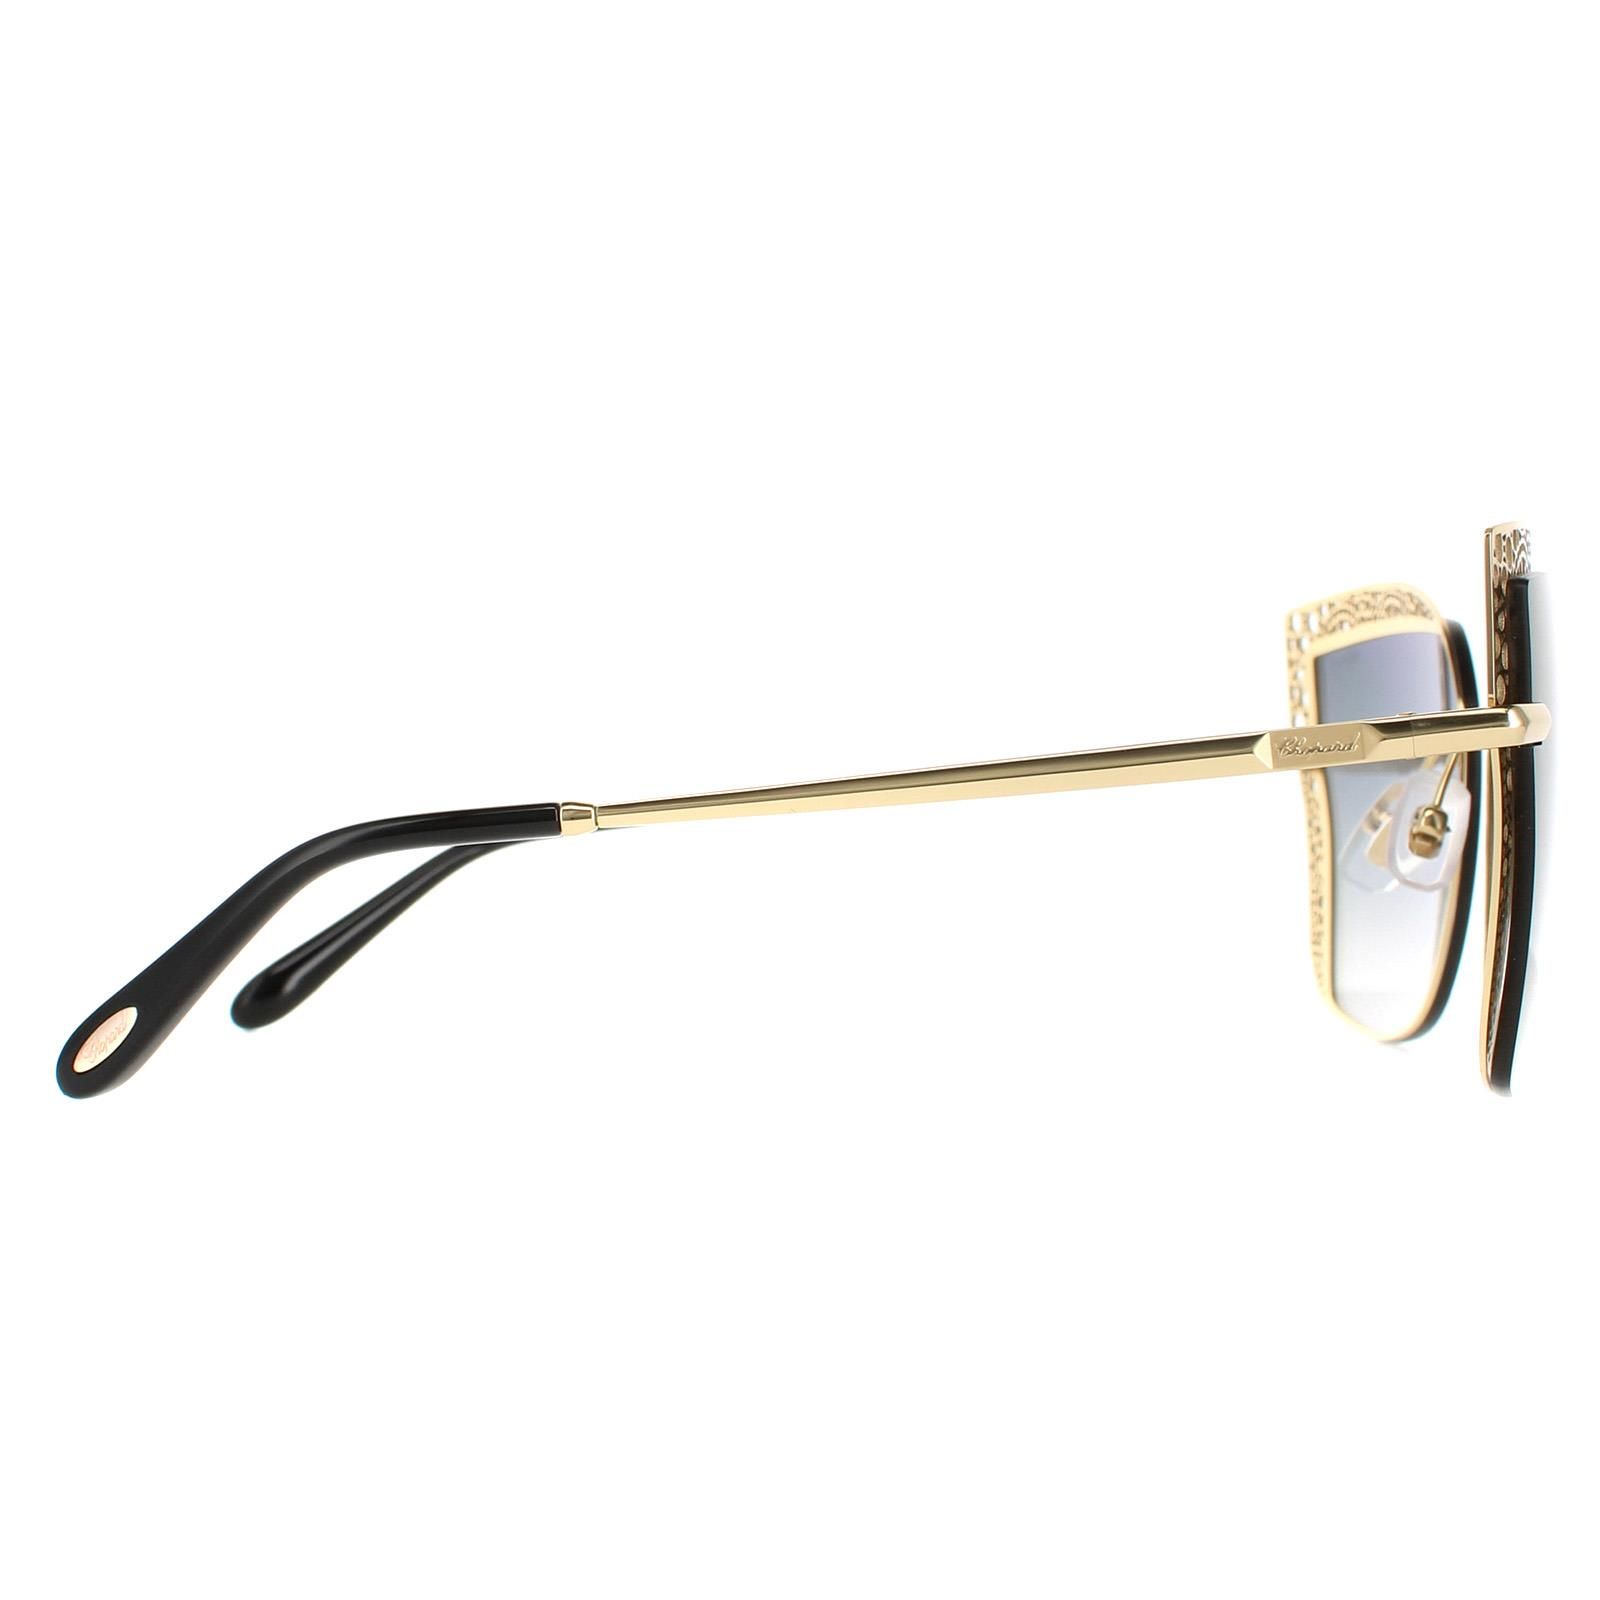 Chopard Butterfly Womens Shiny Rose Gold Smoke Gradient SCHC84M  Chopard are a stunning butterfly design crafted from lightweight metal. Adjustable nose pads and plastic temple tips ensure all day comfort. Gorgeous slender metal temples are engraved with the Chopard branding for authenticity.